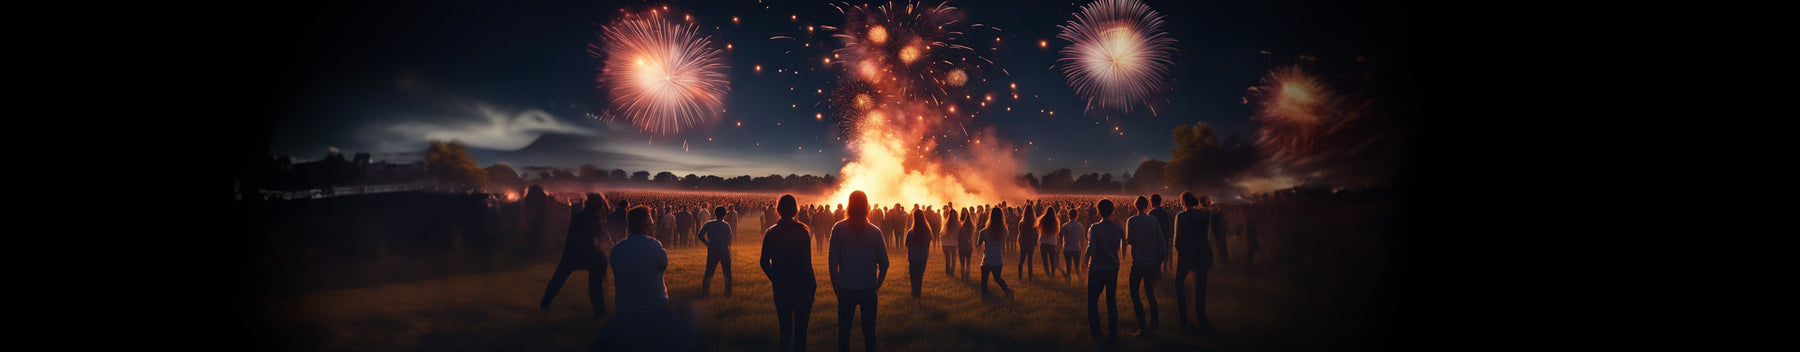 How to Plan a Memorable Bonfire Night Party with Epic Fireworks